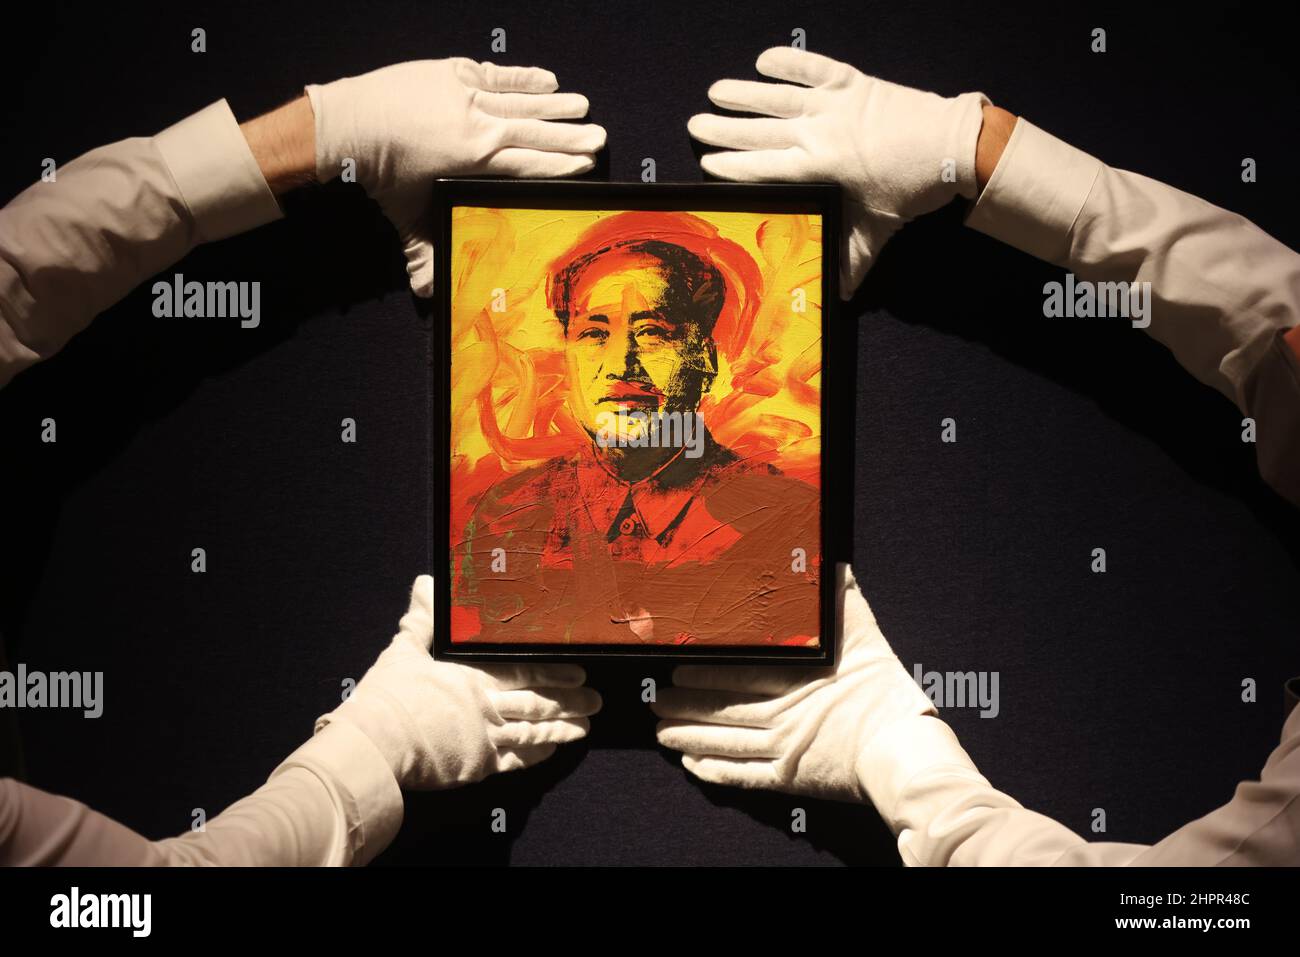 Mao by Andy Warhol, on display during a photocall for the forthcoming 20th/21st century evening sale, The Art of the Surreal, at Christie's in London. Highlights of the sale include Francis Bacon's Triptych 1986-7, which is estimated to fetch £35m to £55m. Picture date: Wednesday February 23, 2022. Stock Photo